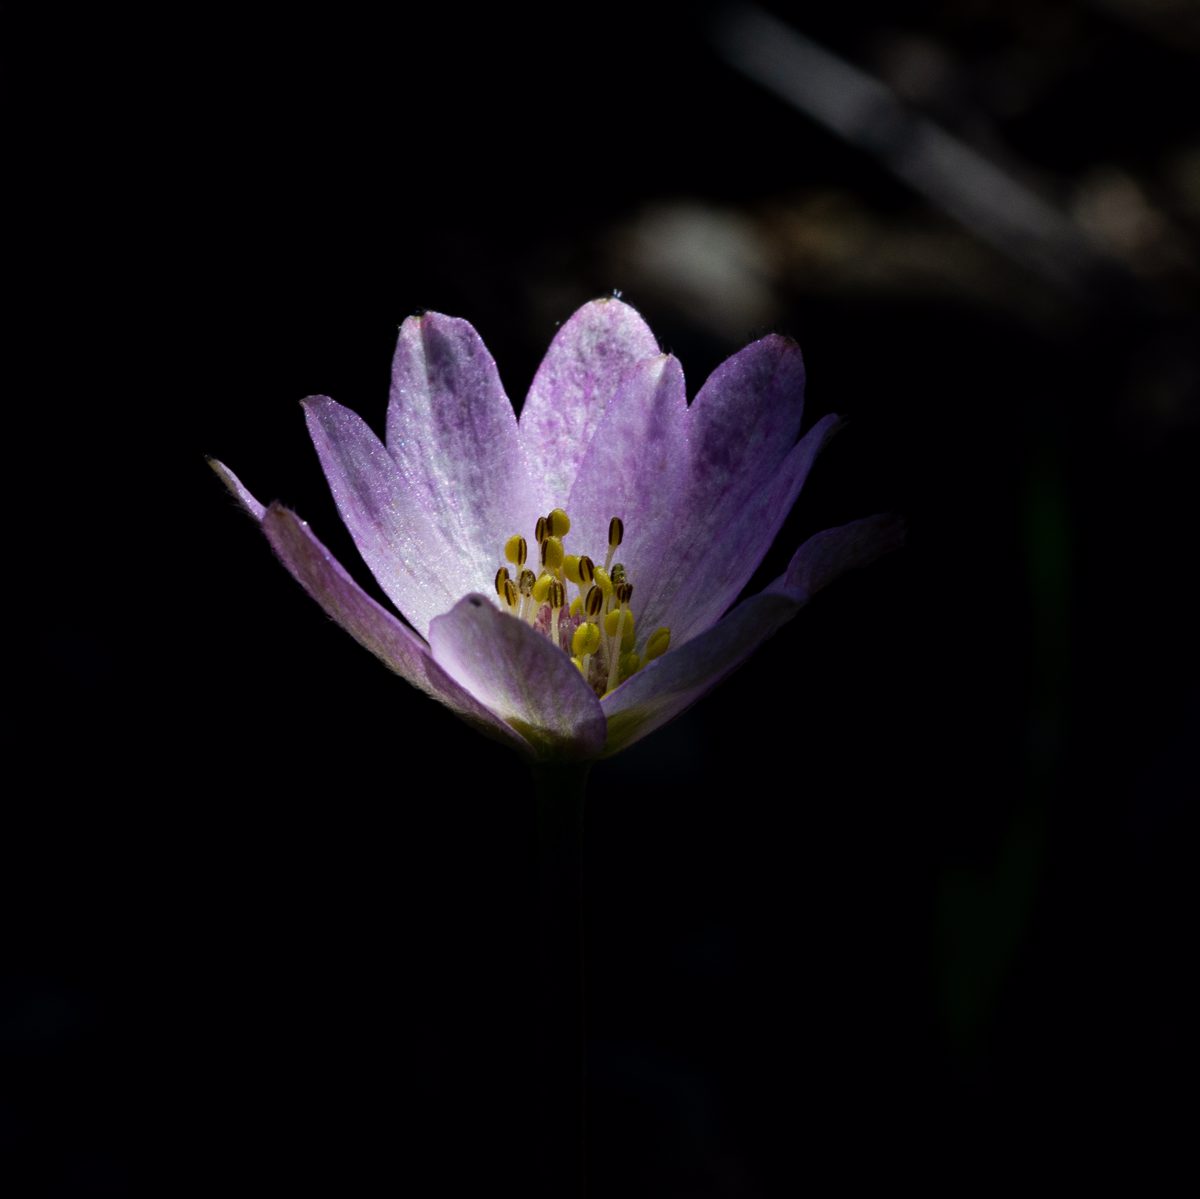 Purplish petals in the light with deep shadows in the background.